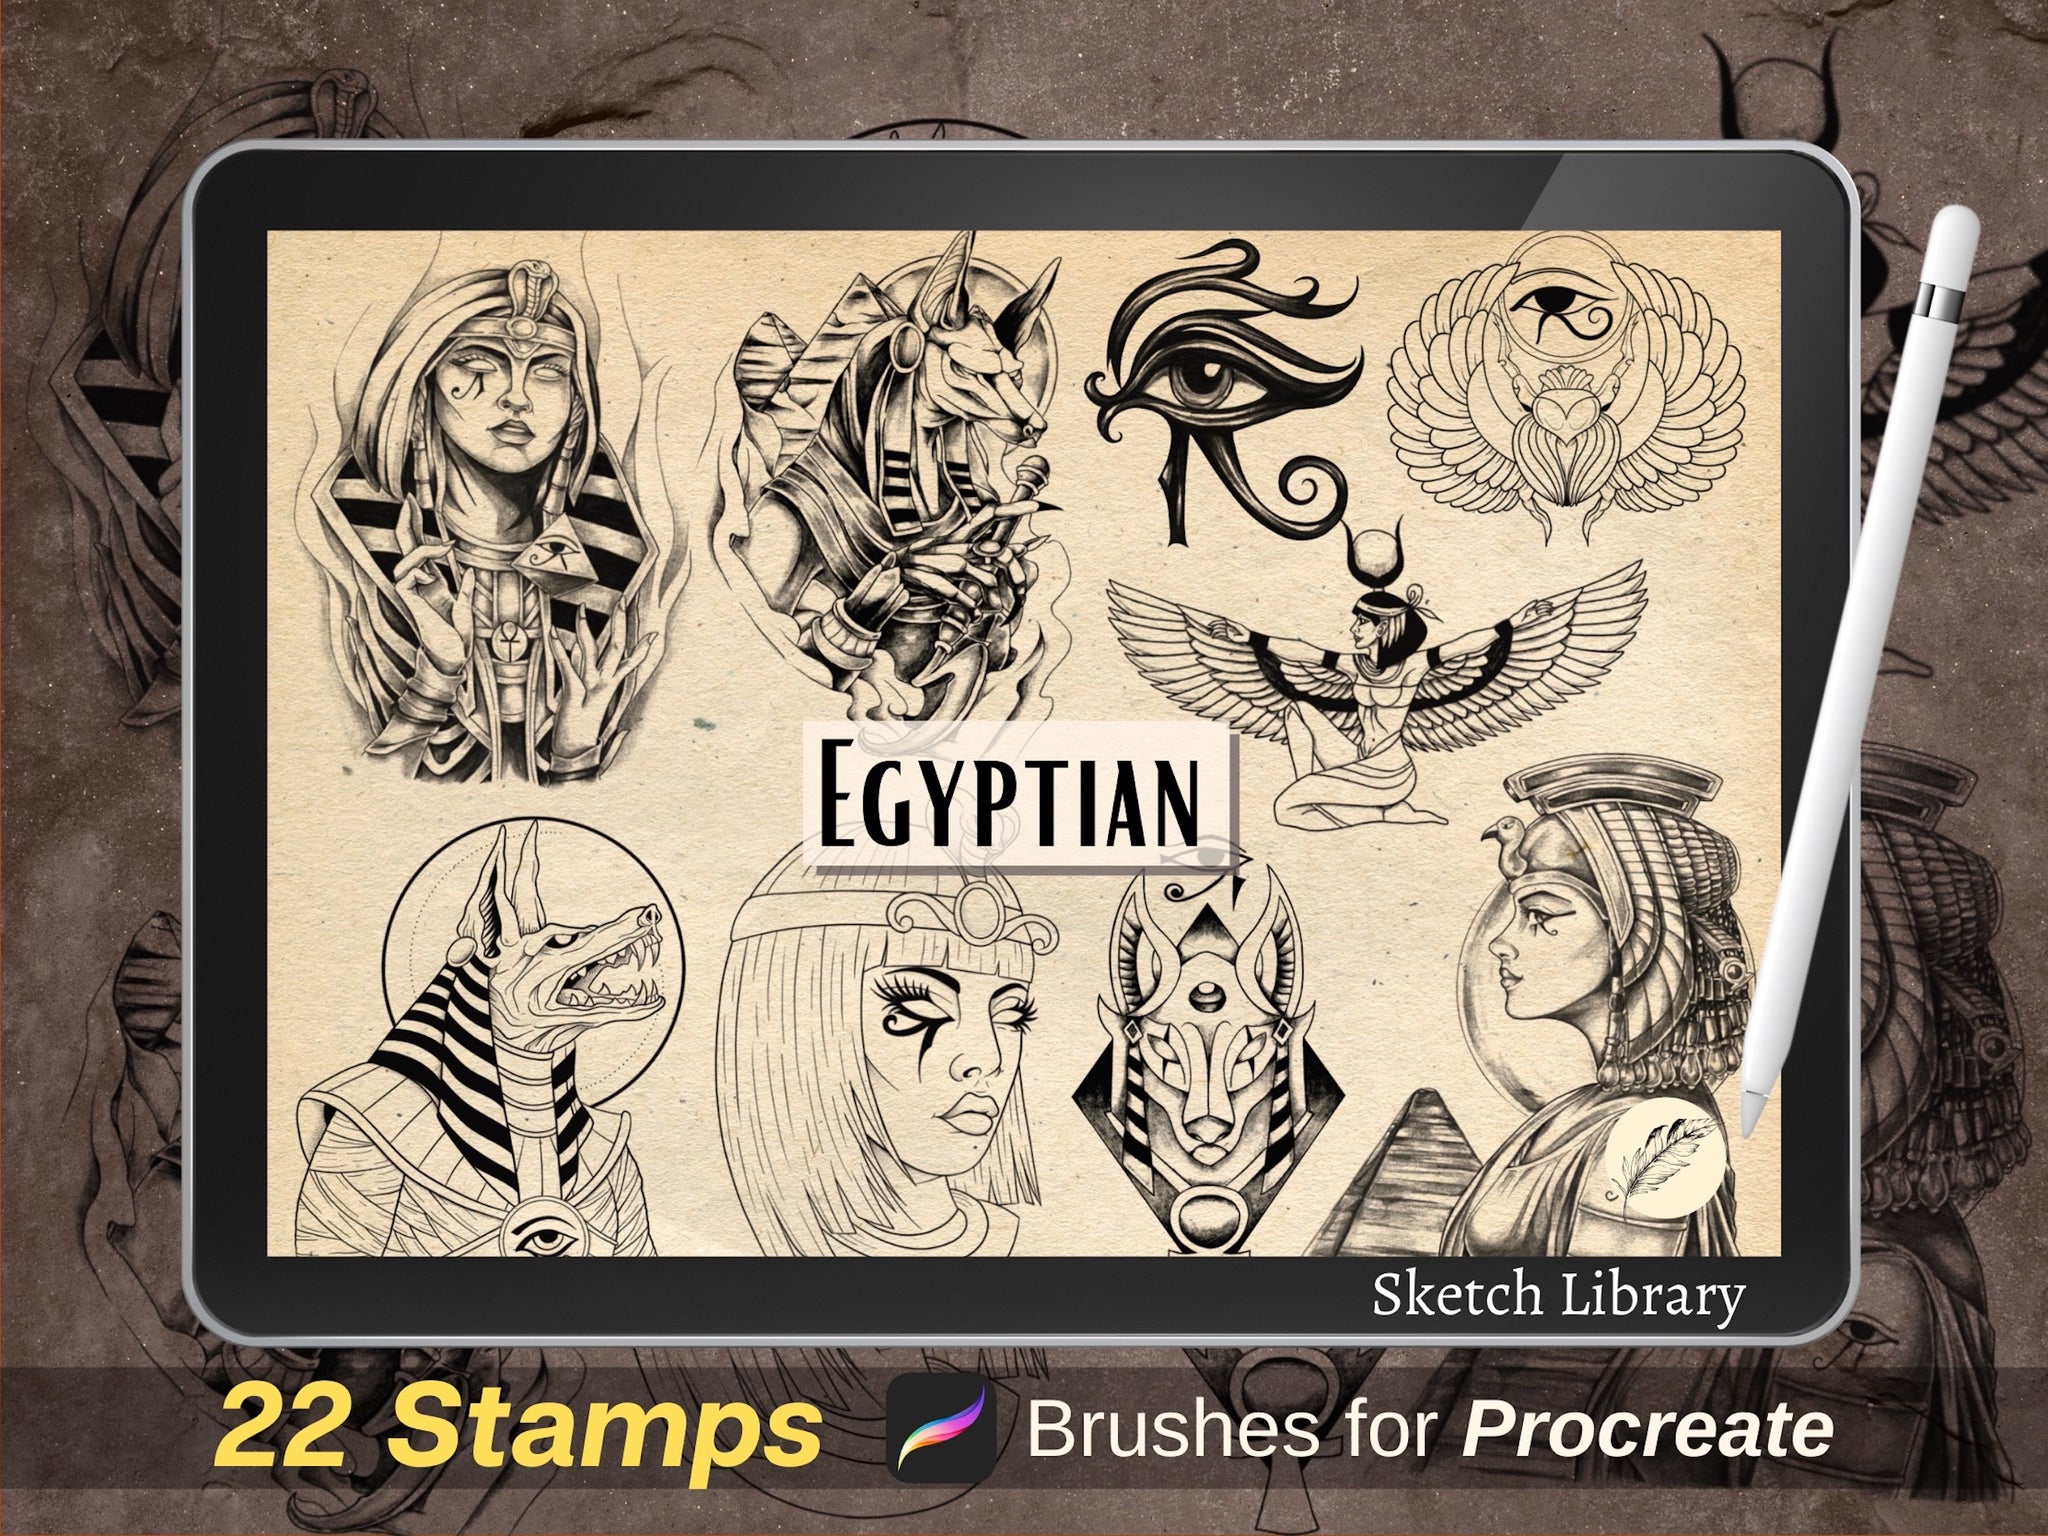 Introducing interesting Pharaoh tattoo designs for forearm